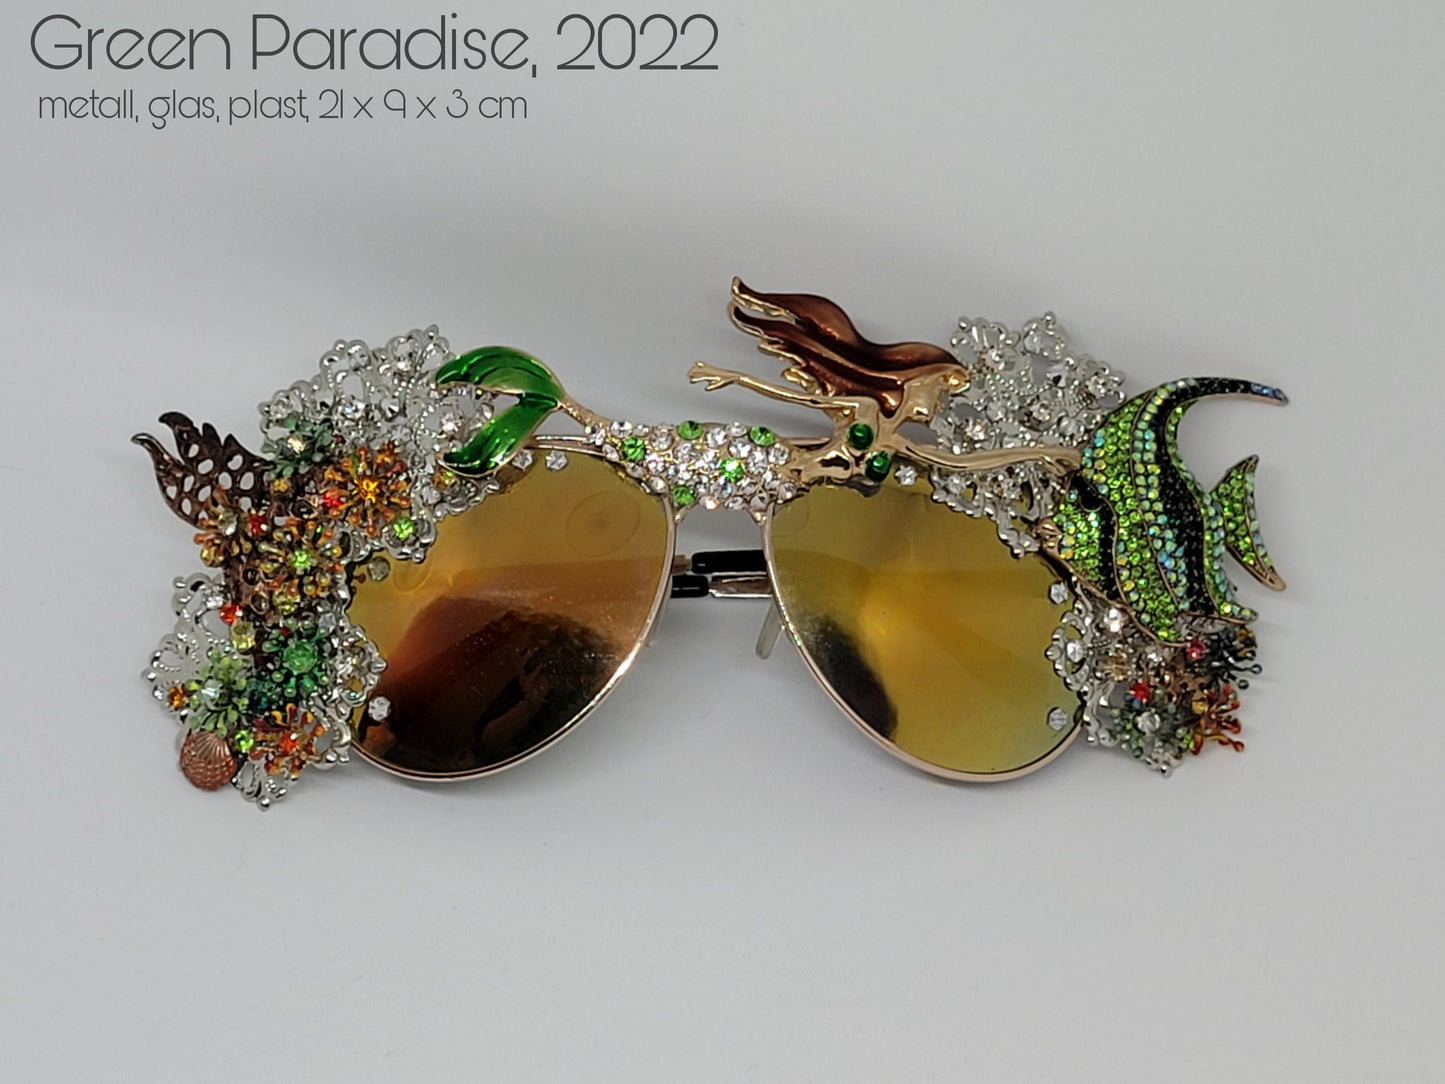 Shifting Depths collection: the Green Paradise sculptural sunglasses